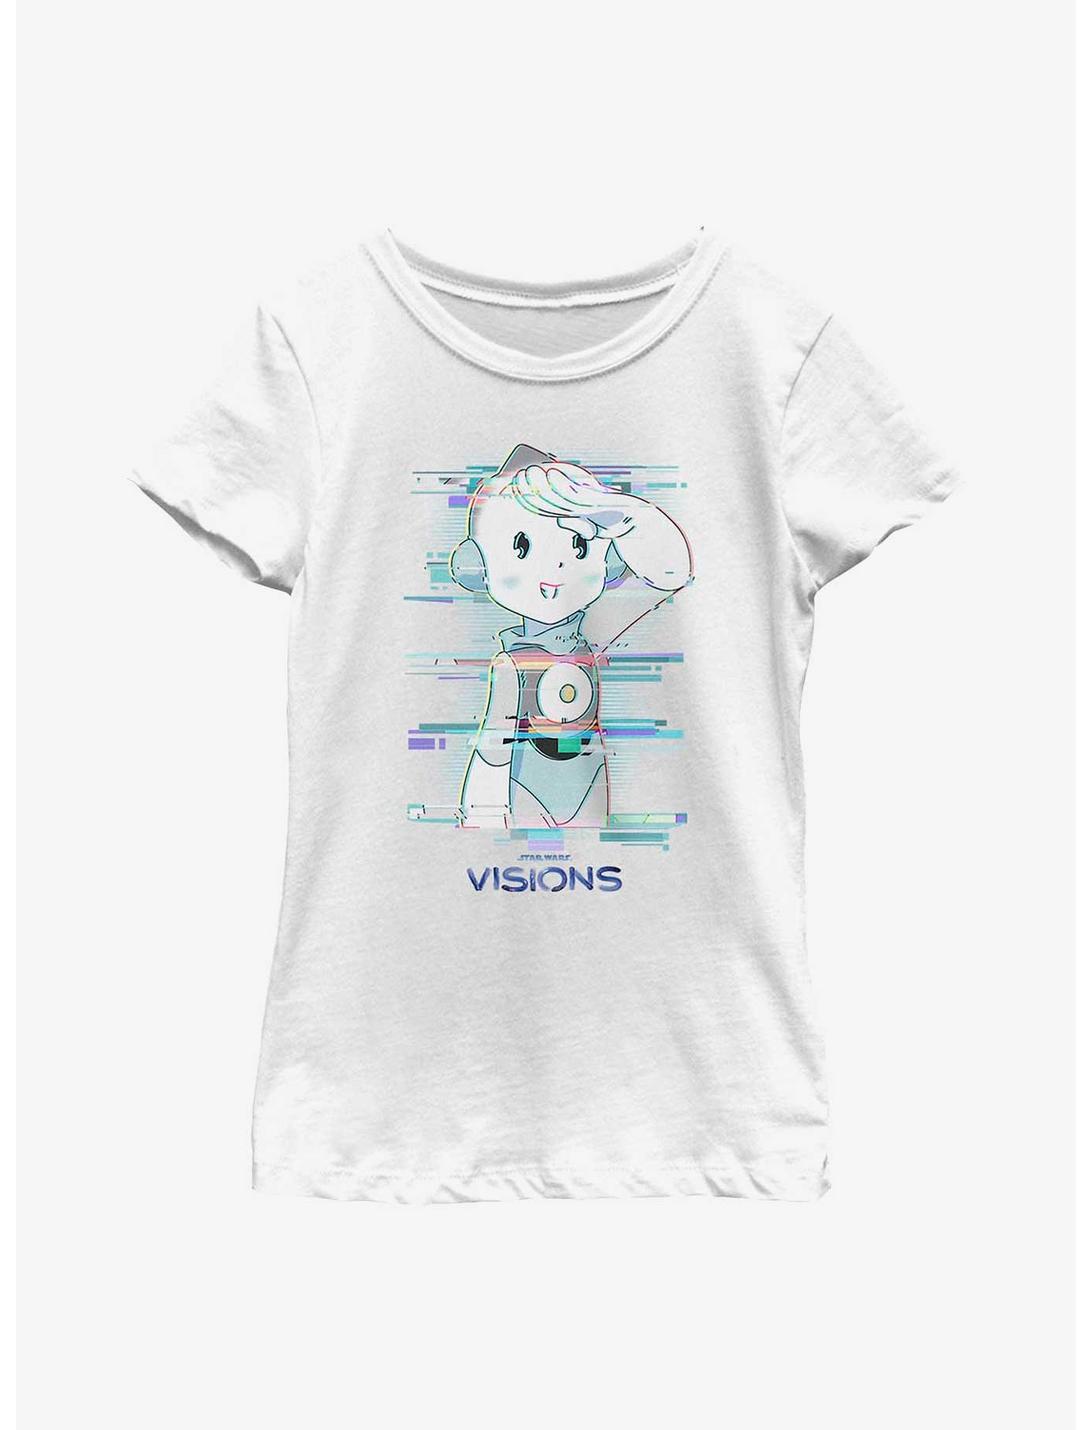 Star Wars: Visions Salute Youth Girls T-Shirt, WHITE, hi-res